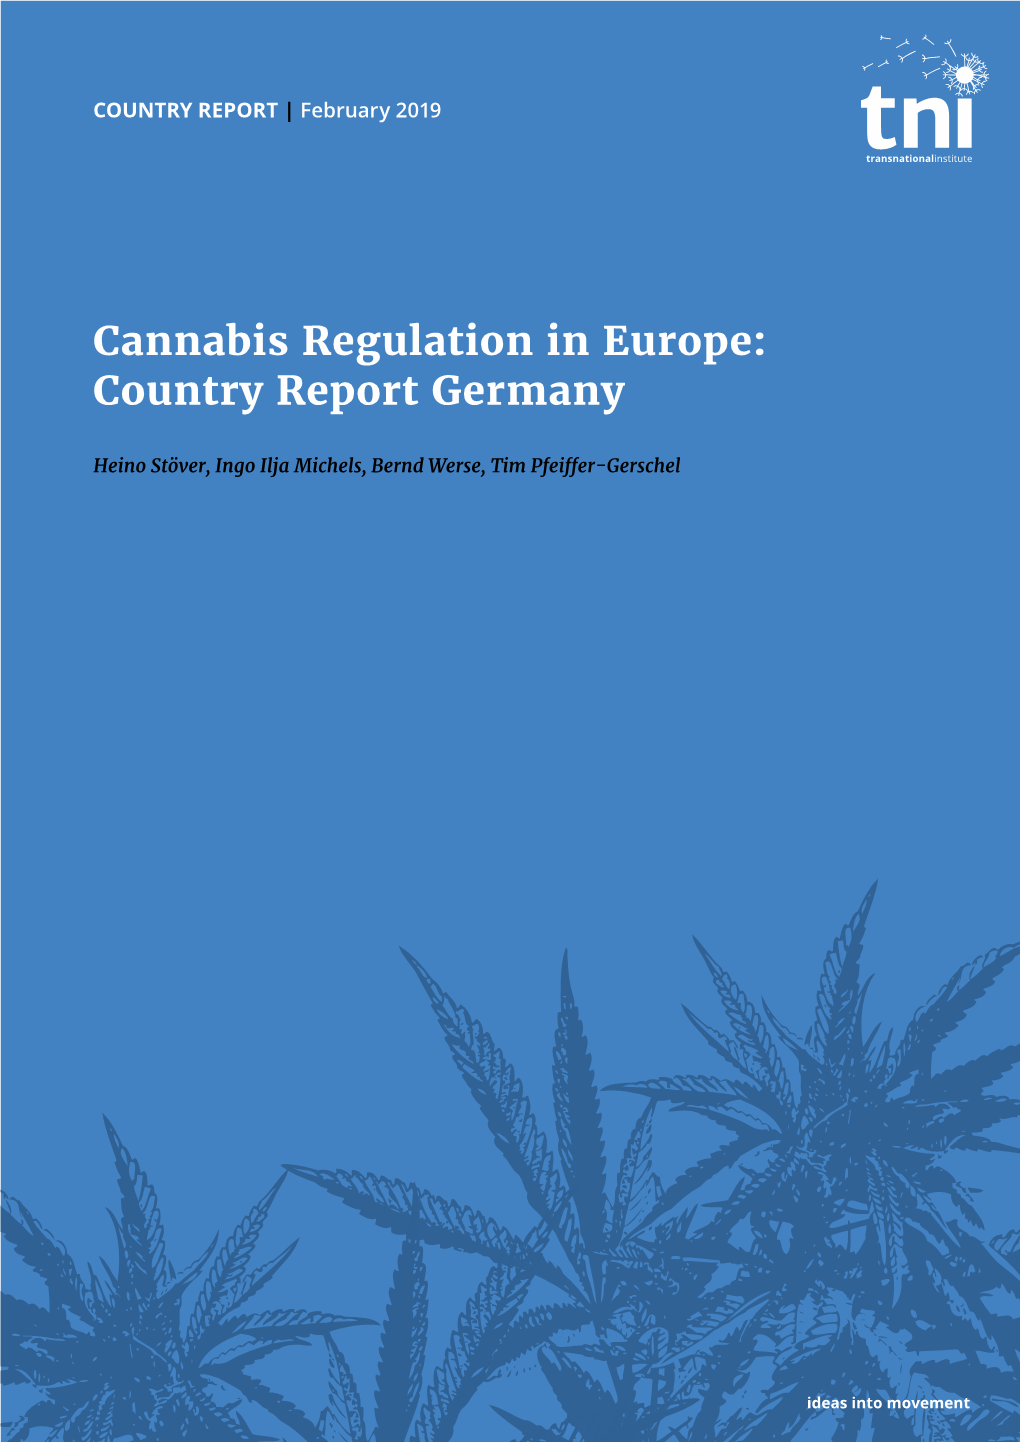 Cannabis Regulation in Europe: Country Report Germany